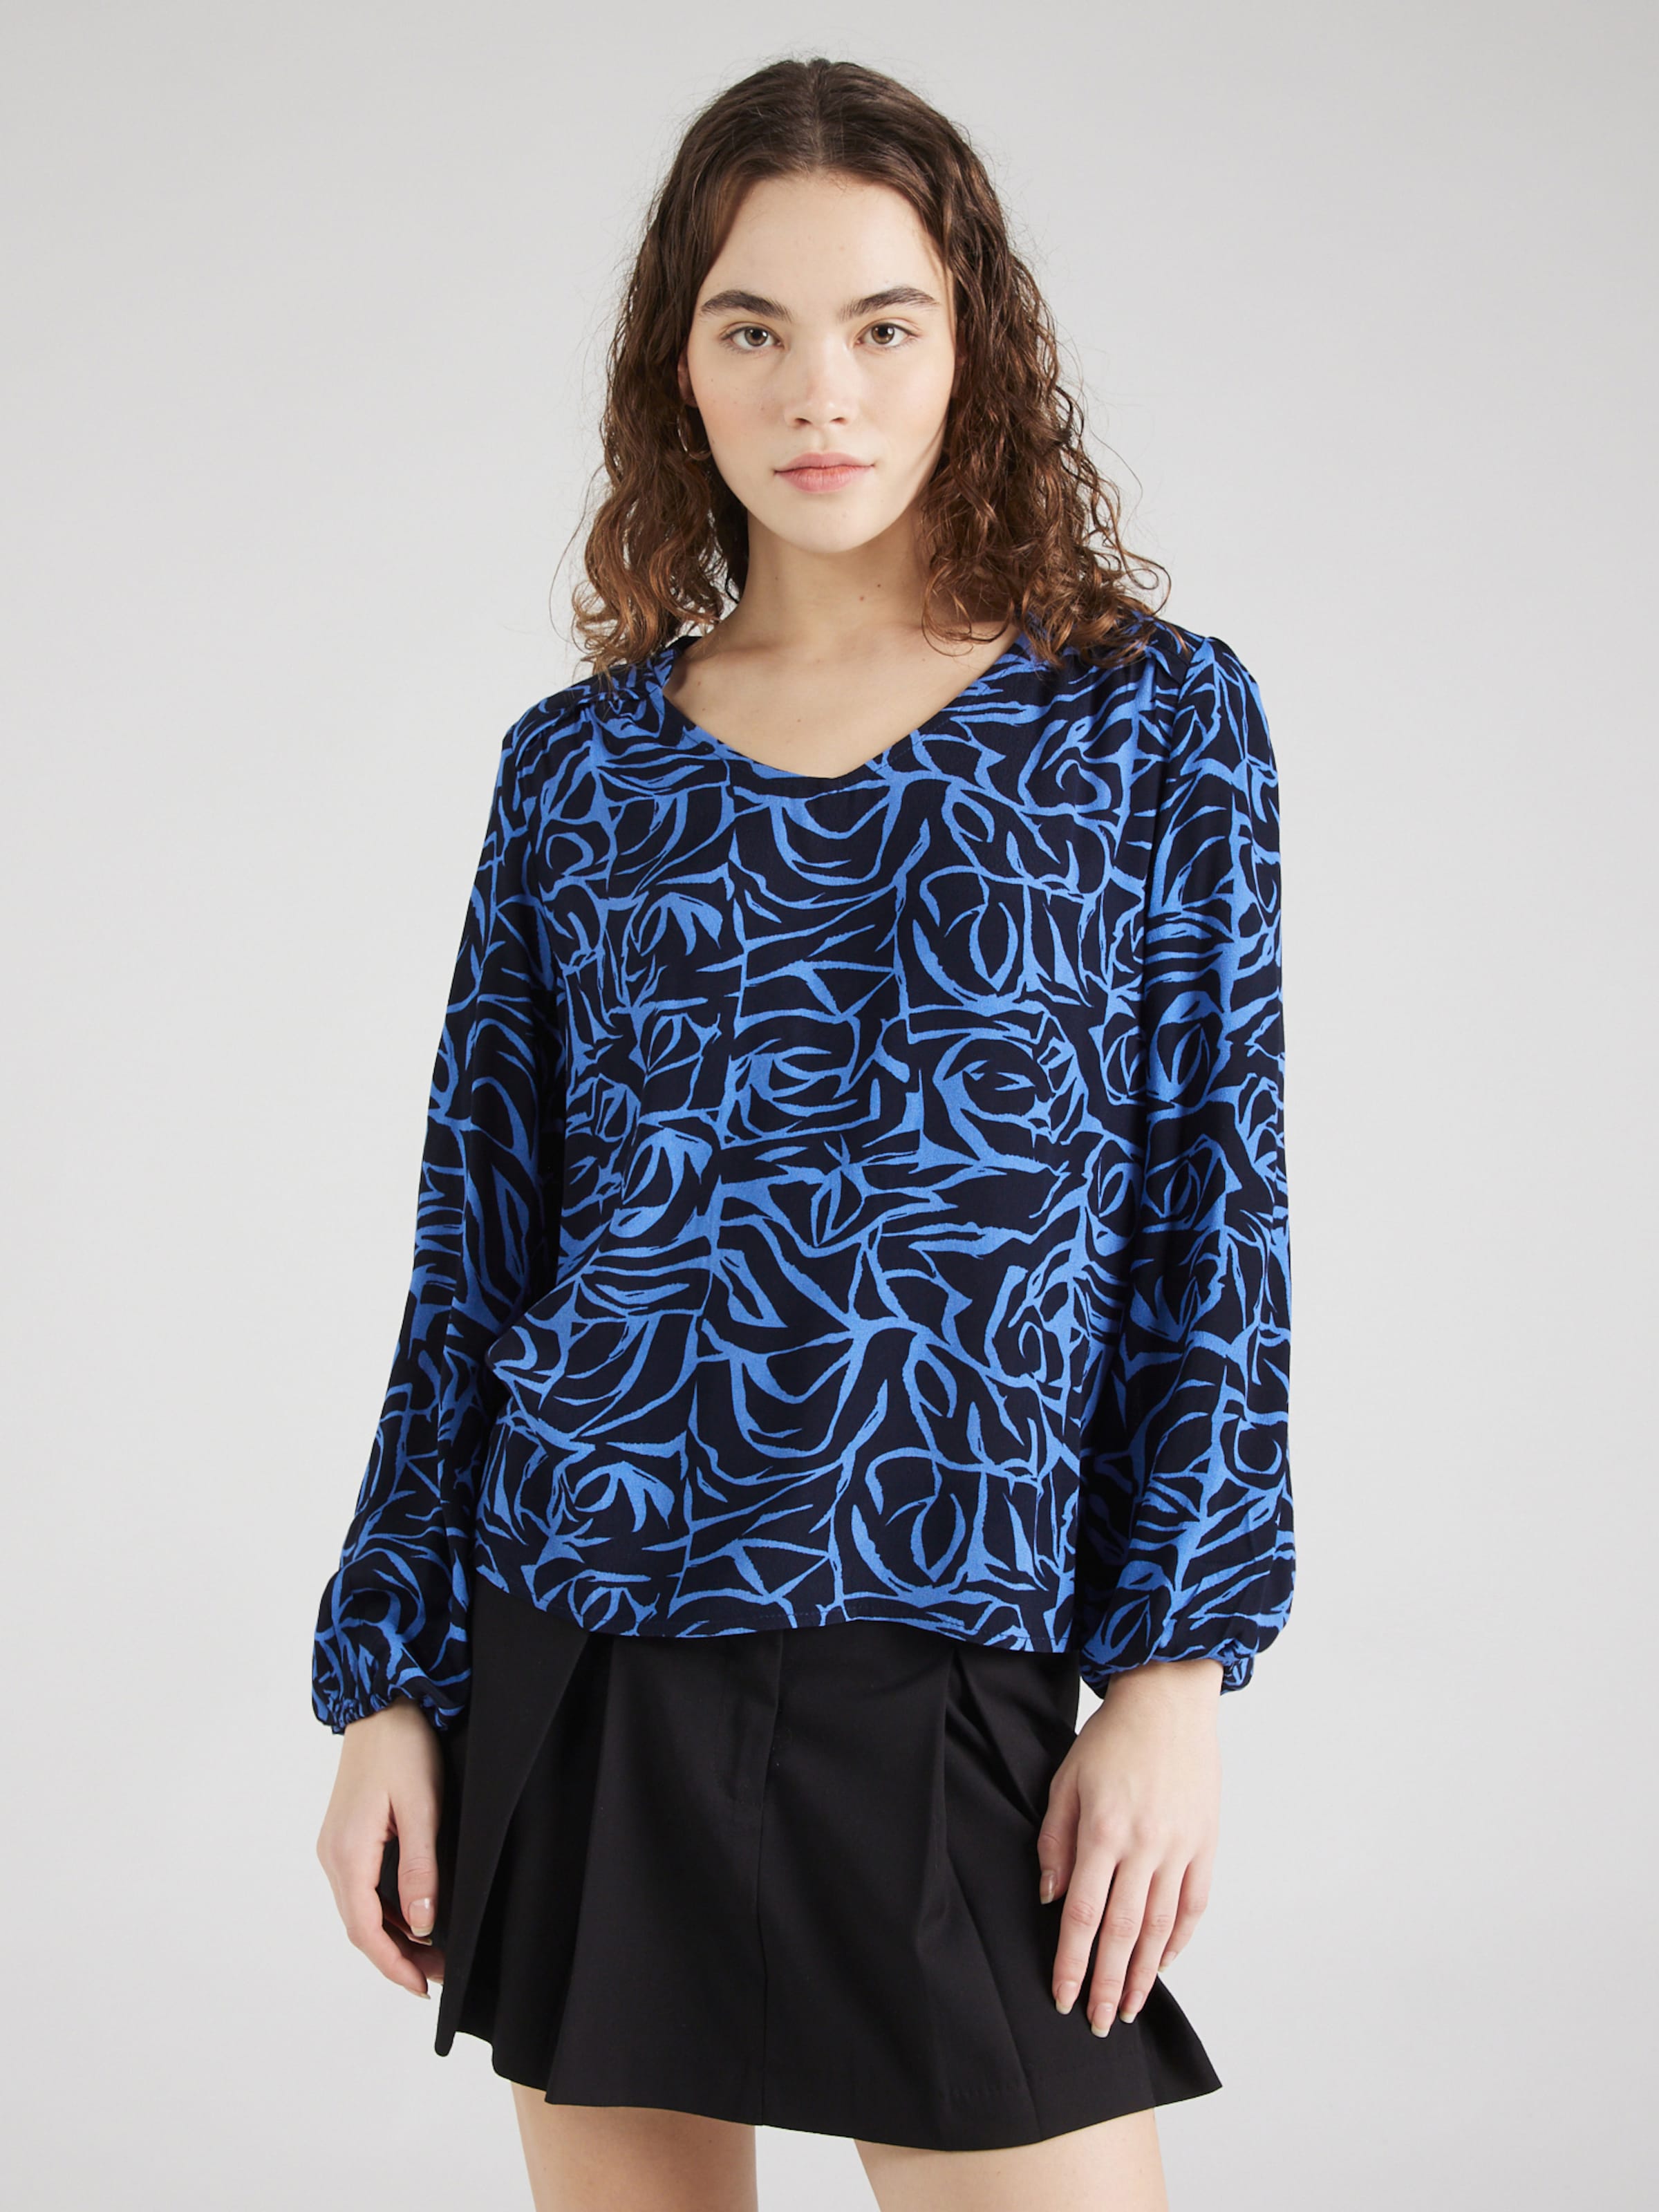 ZABAIONE Blouse \'Ga44ia\' in Navy, Royal Blue | ABOUT YOU